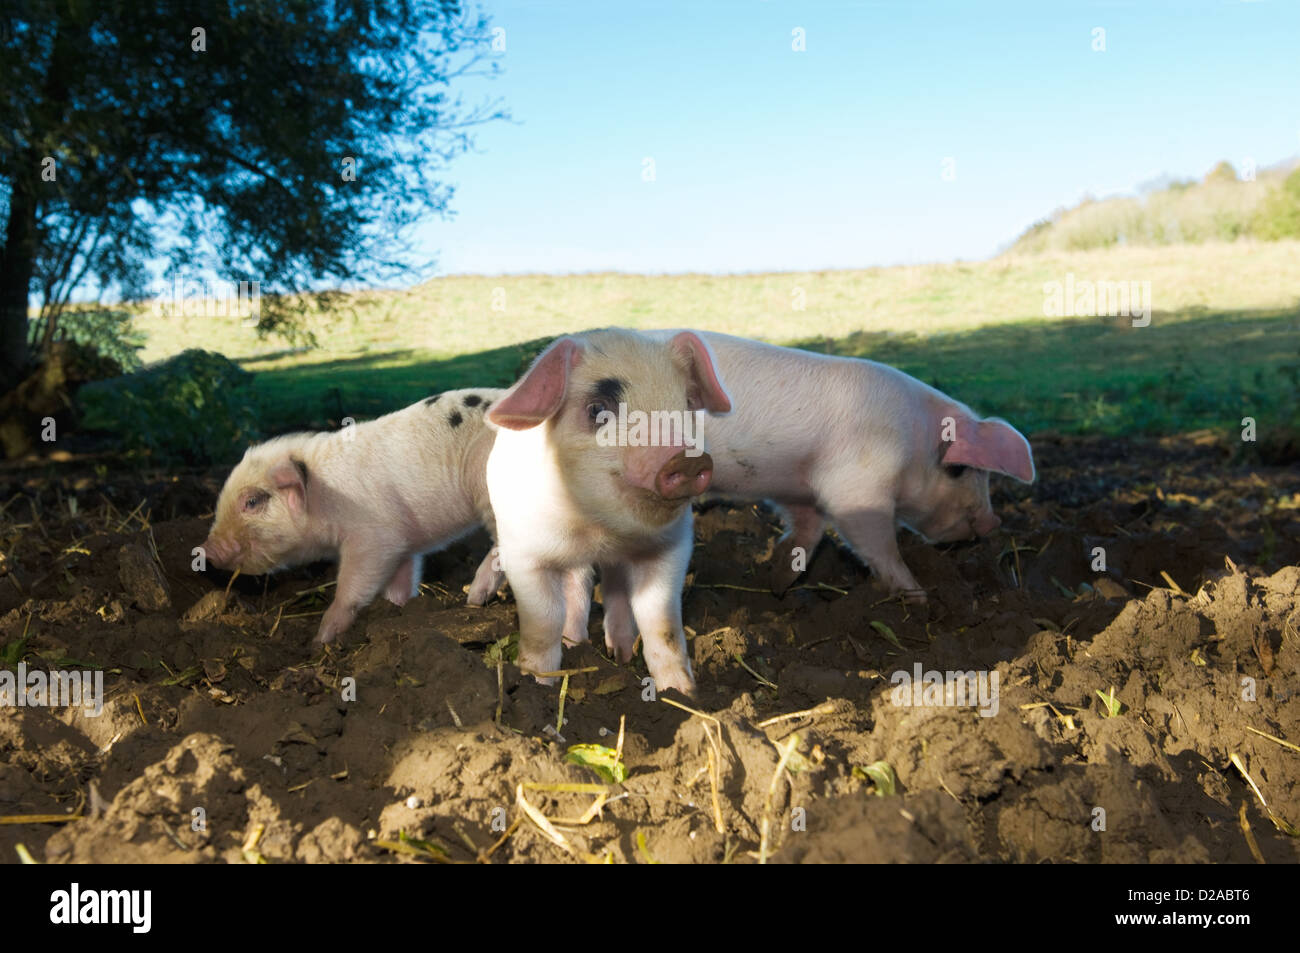 Pigs rooting in dirt field Stock Photo